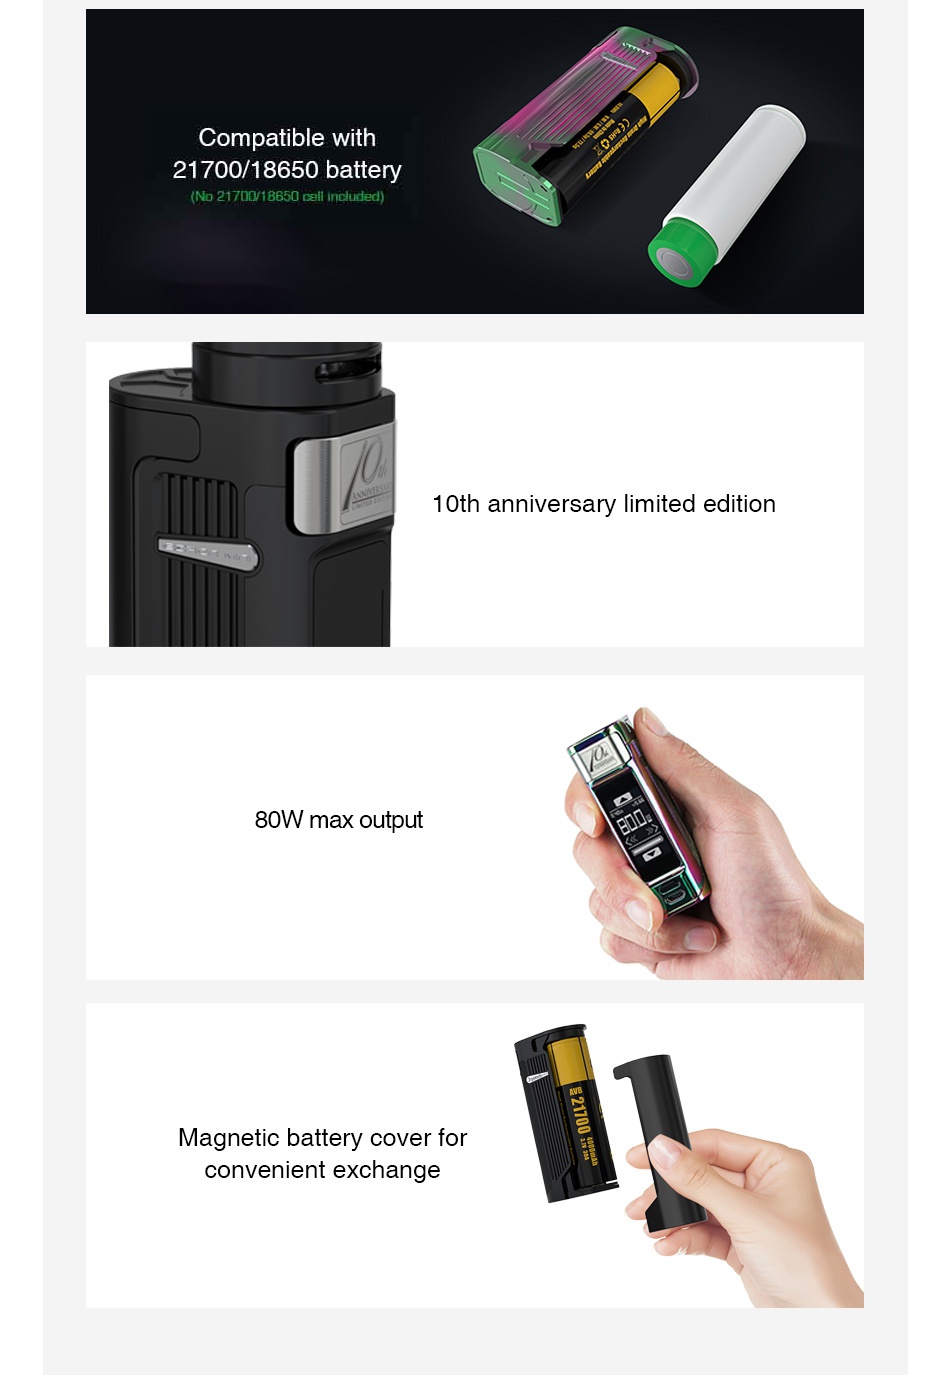 Joyetech ESPION Solo 21700 80W TC Box MOD Compatible with 21700 18650 battery  No 21 0018650 call included  1oth anniversary limited edition 80W max output Magnetic battery cover for convenient exchange